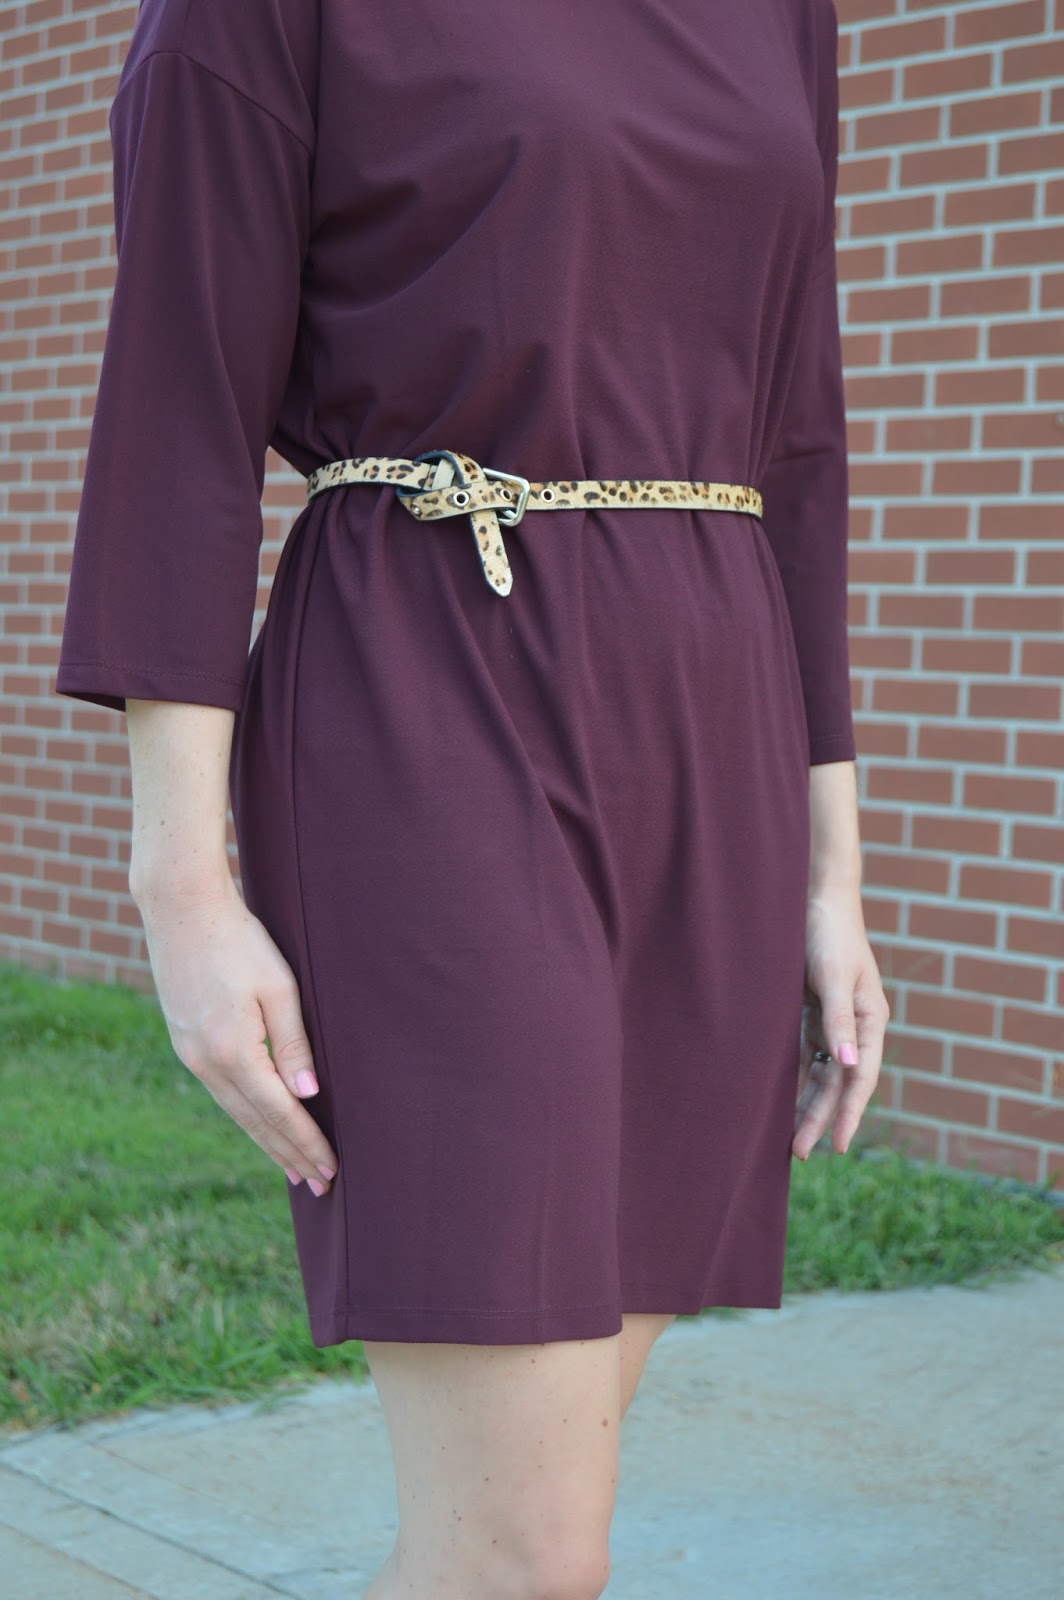 leopard belt around dress | how to incorporate leopard print into an outfit | how to do leopard print tastefully | how to tie a belt over a dress | a memory of us | nordstrom anniversary sale haul | 